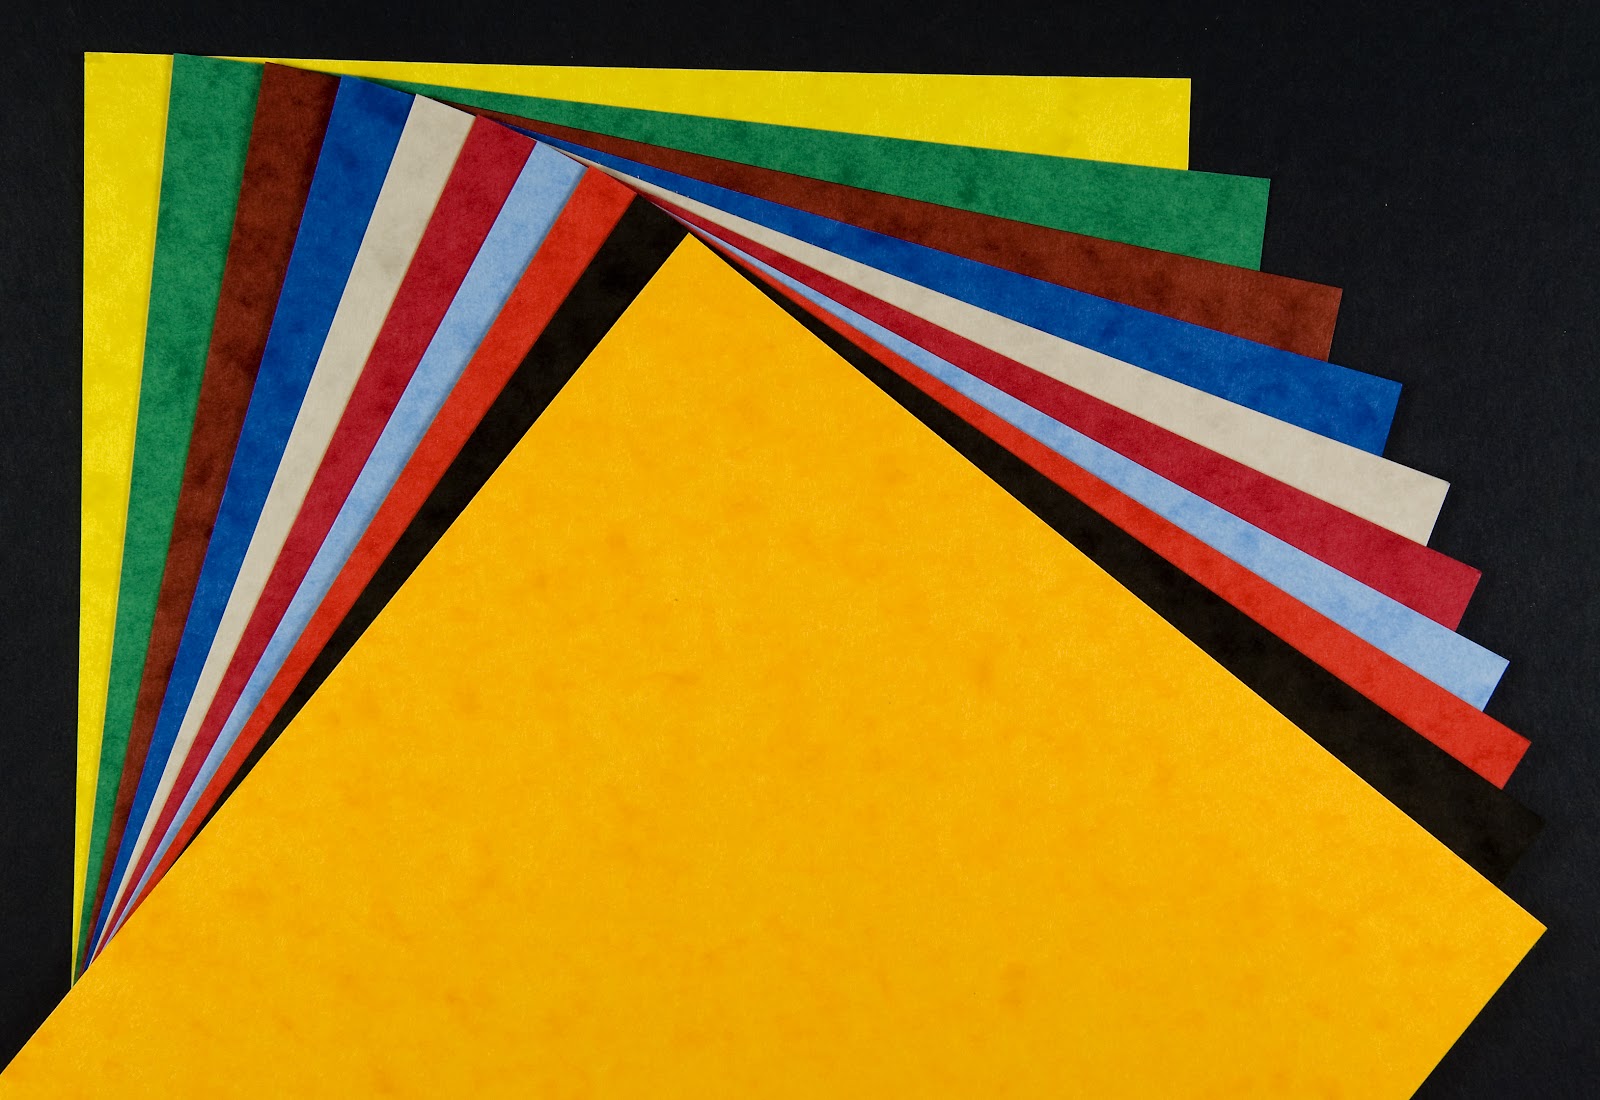 File:Coloured, textured craft card.jpg - Wikimedia Commons